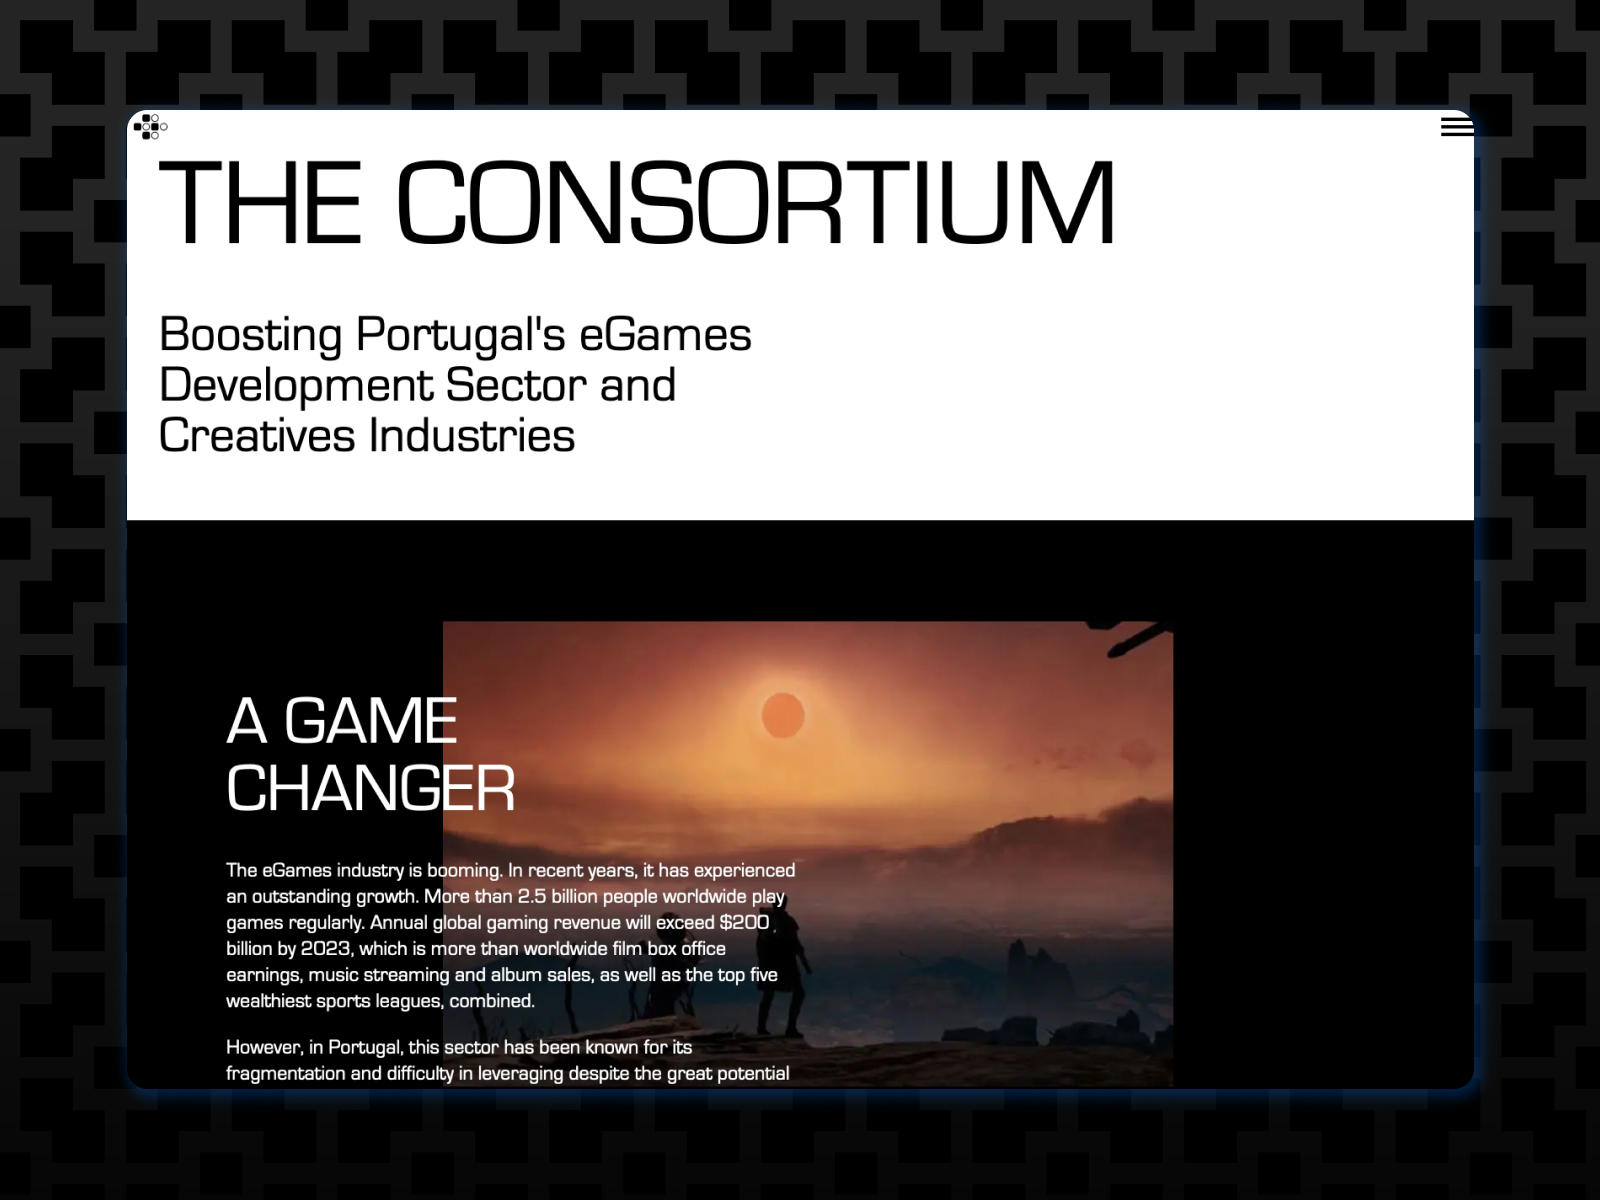 The Consortium content page